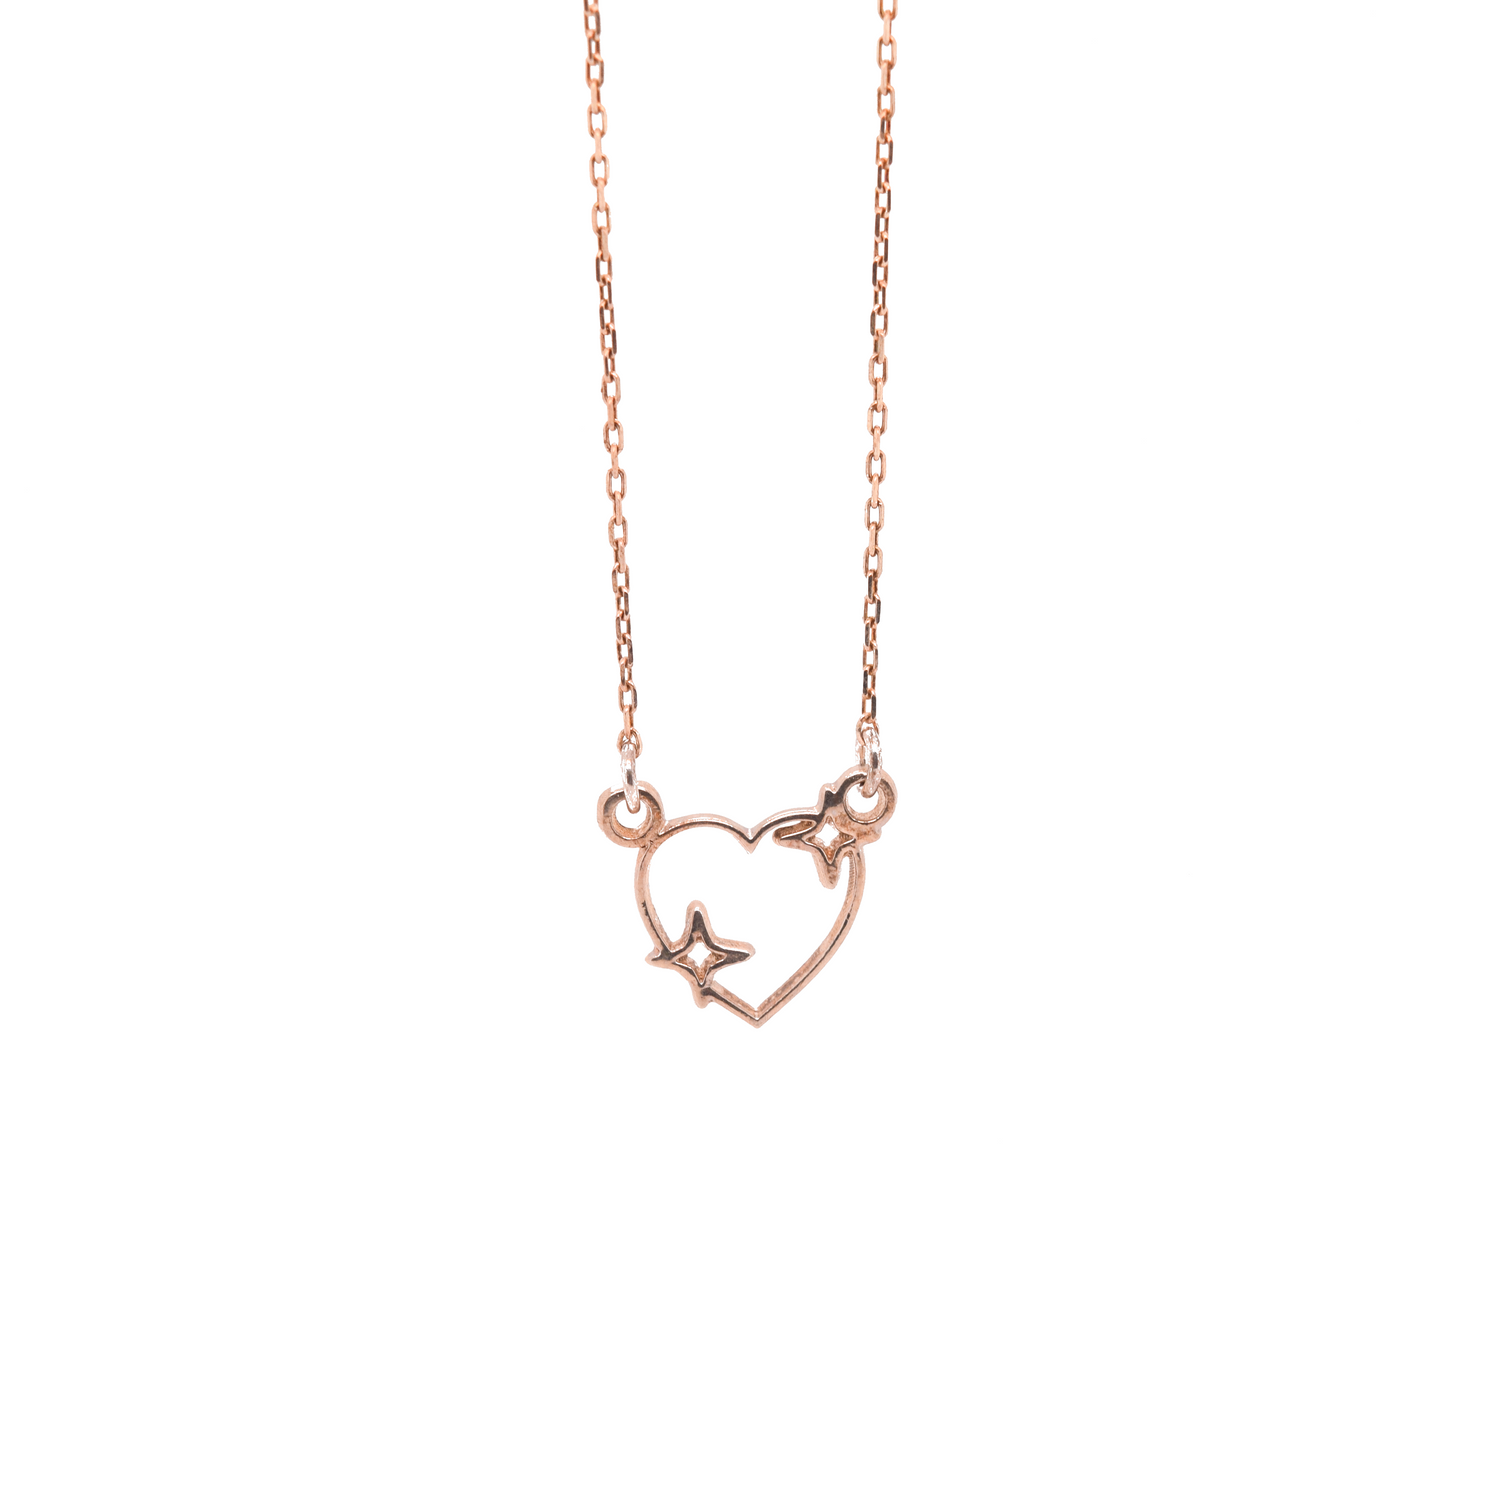 Sparkle Heart Necklace - Bing Bang Jewelry NYC